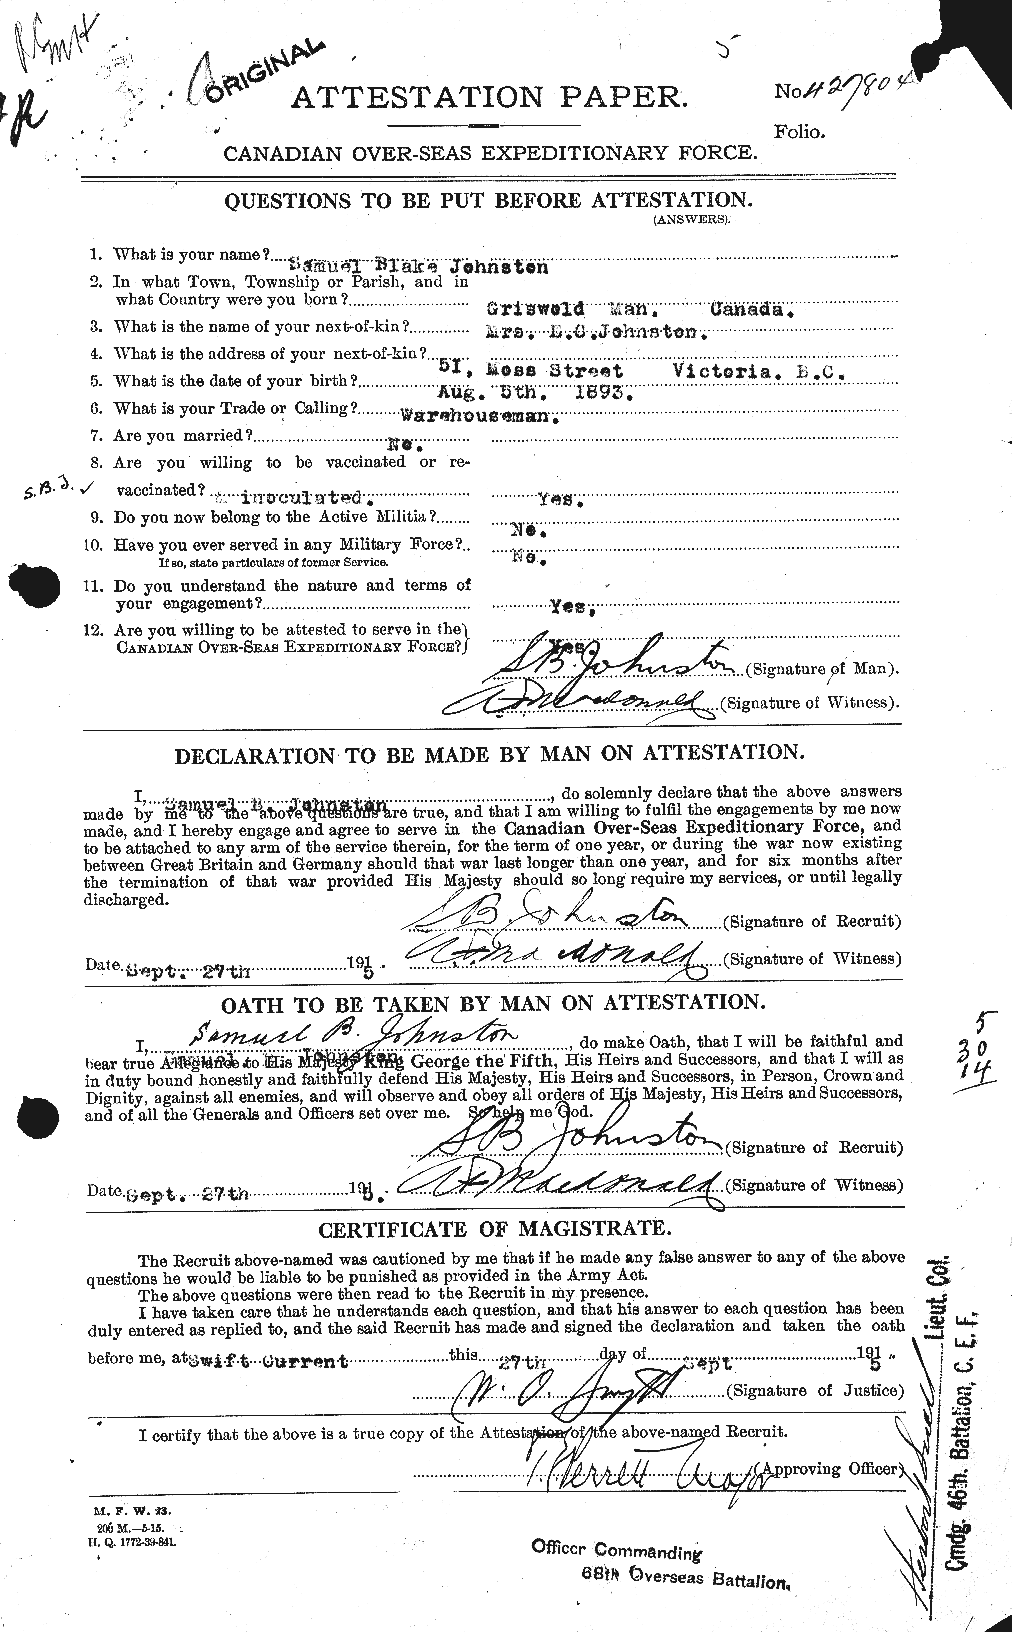 Personnel Records of the First World War - CEF 427085a